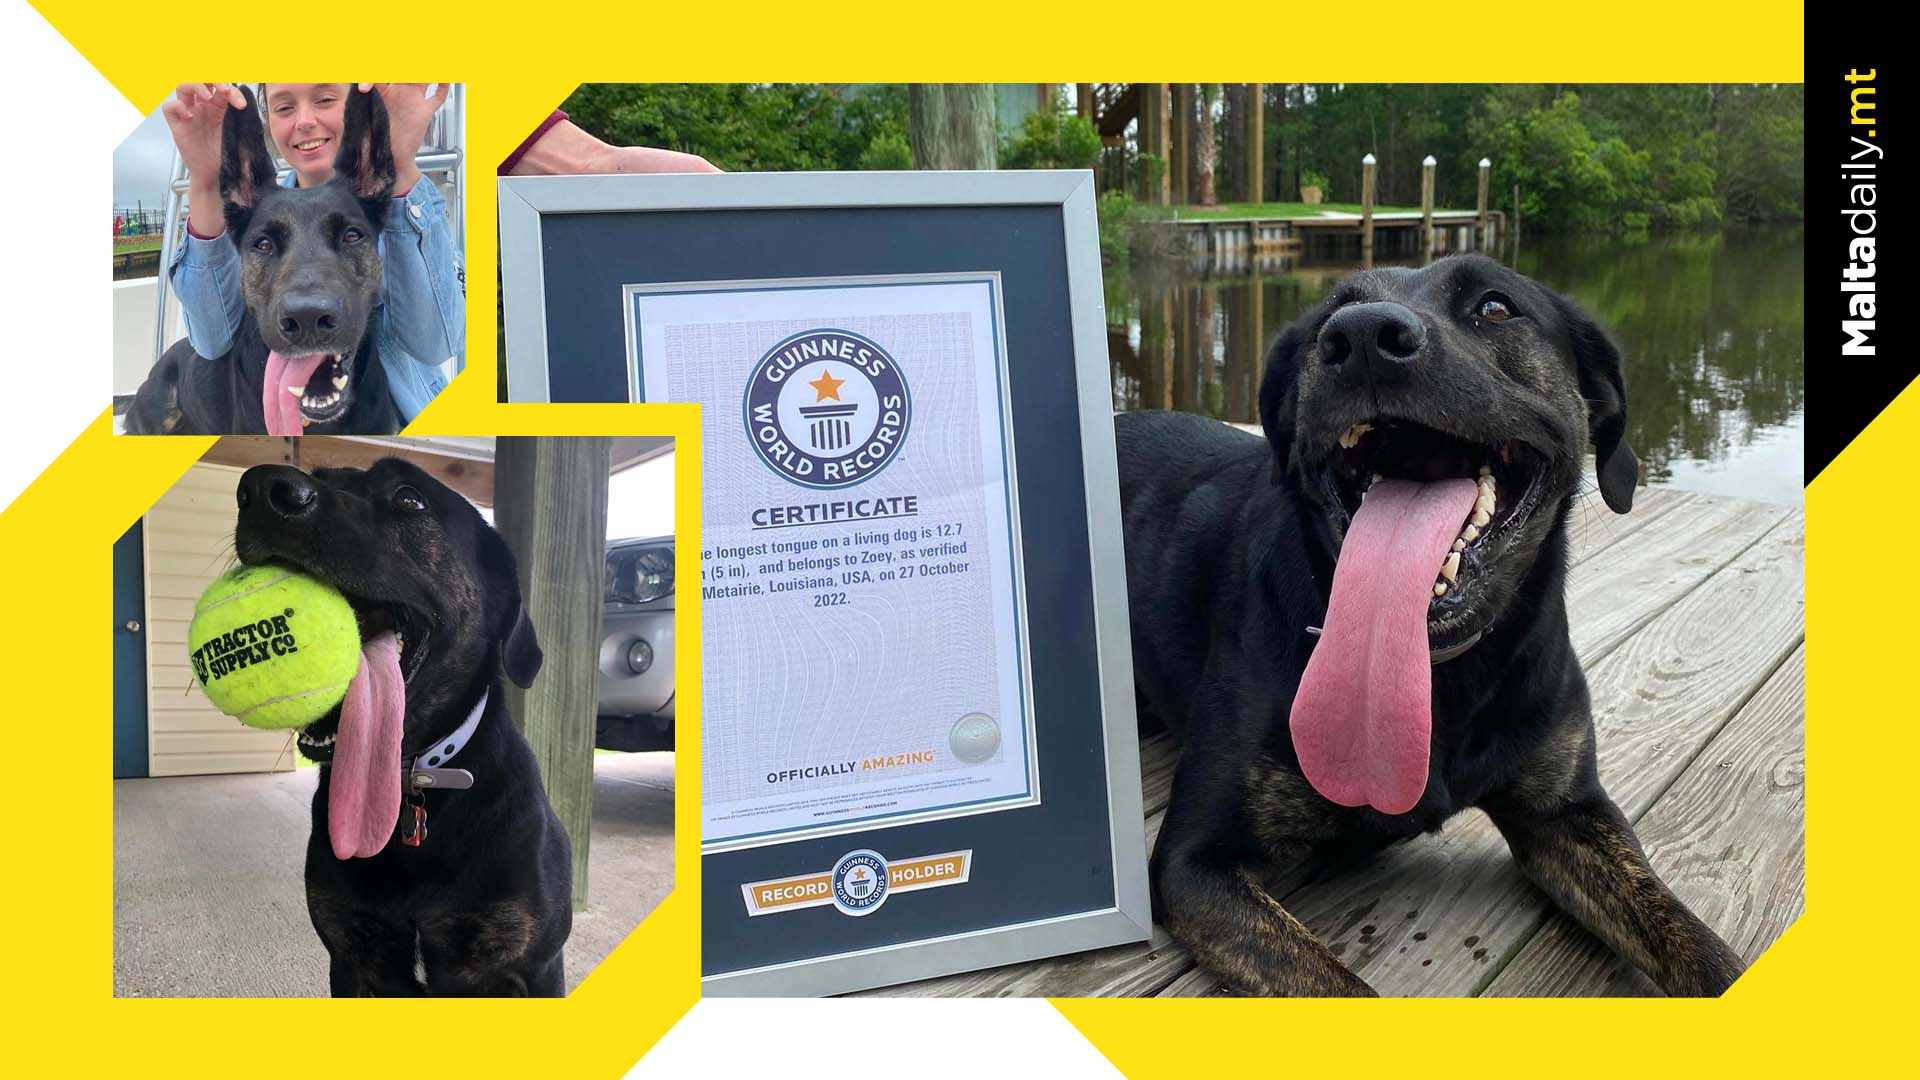 Dog earns Guinness World Record for longest tongue